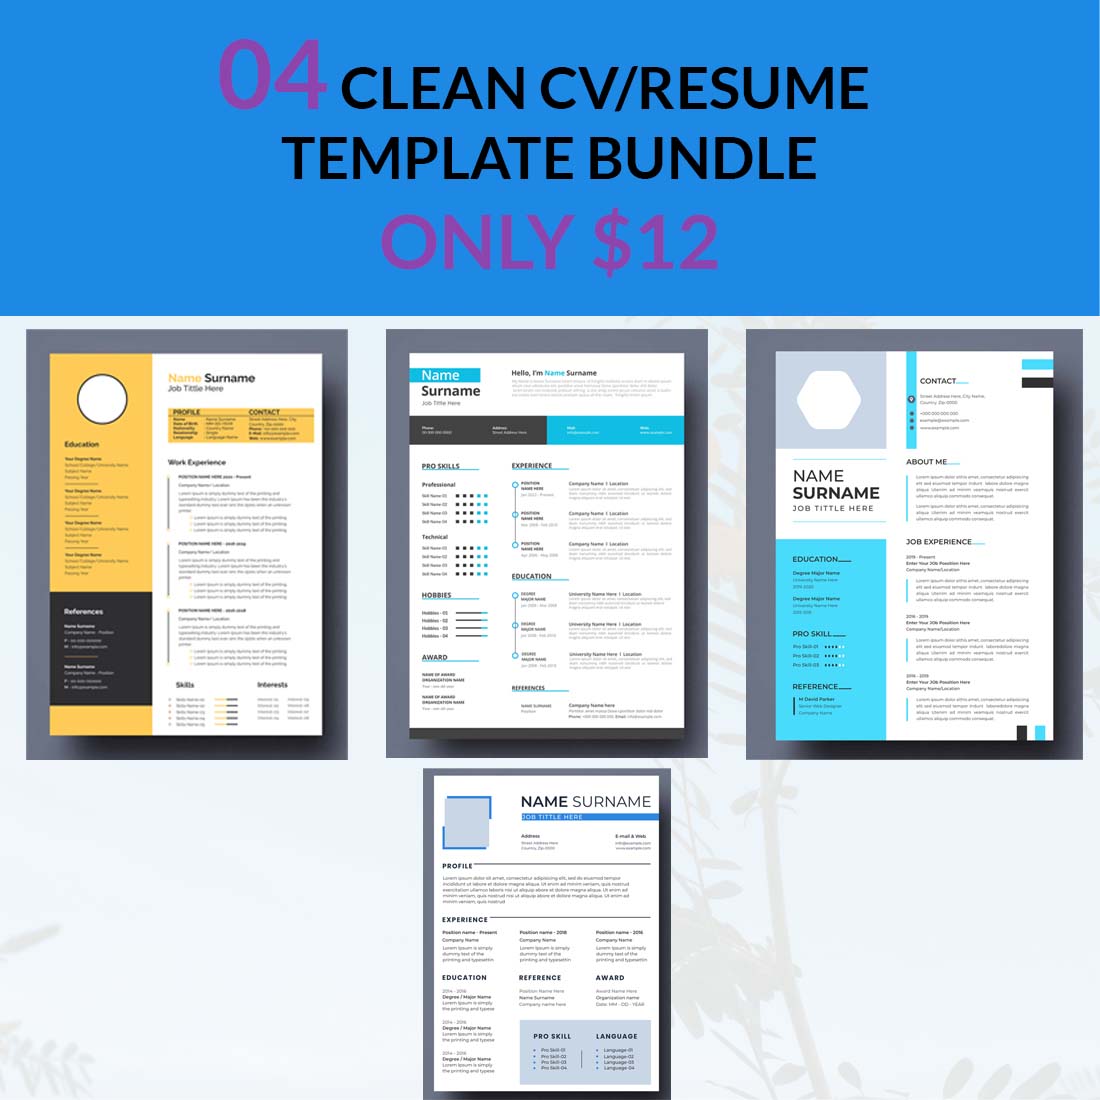 04 CLEAN CV/RESUME TEMPLATE BUNDLE ONLY $12 cover image.